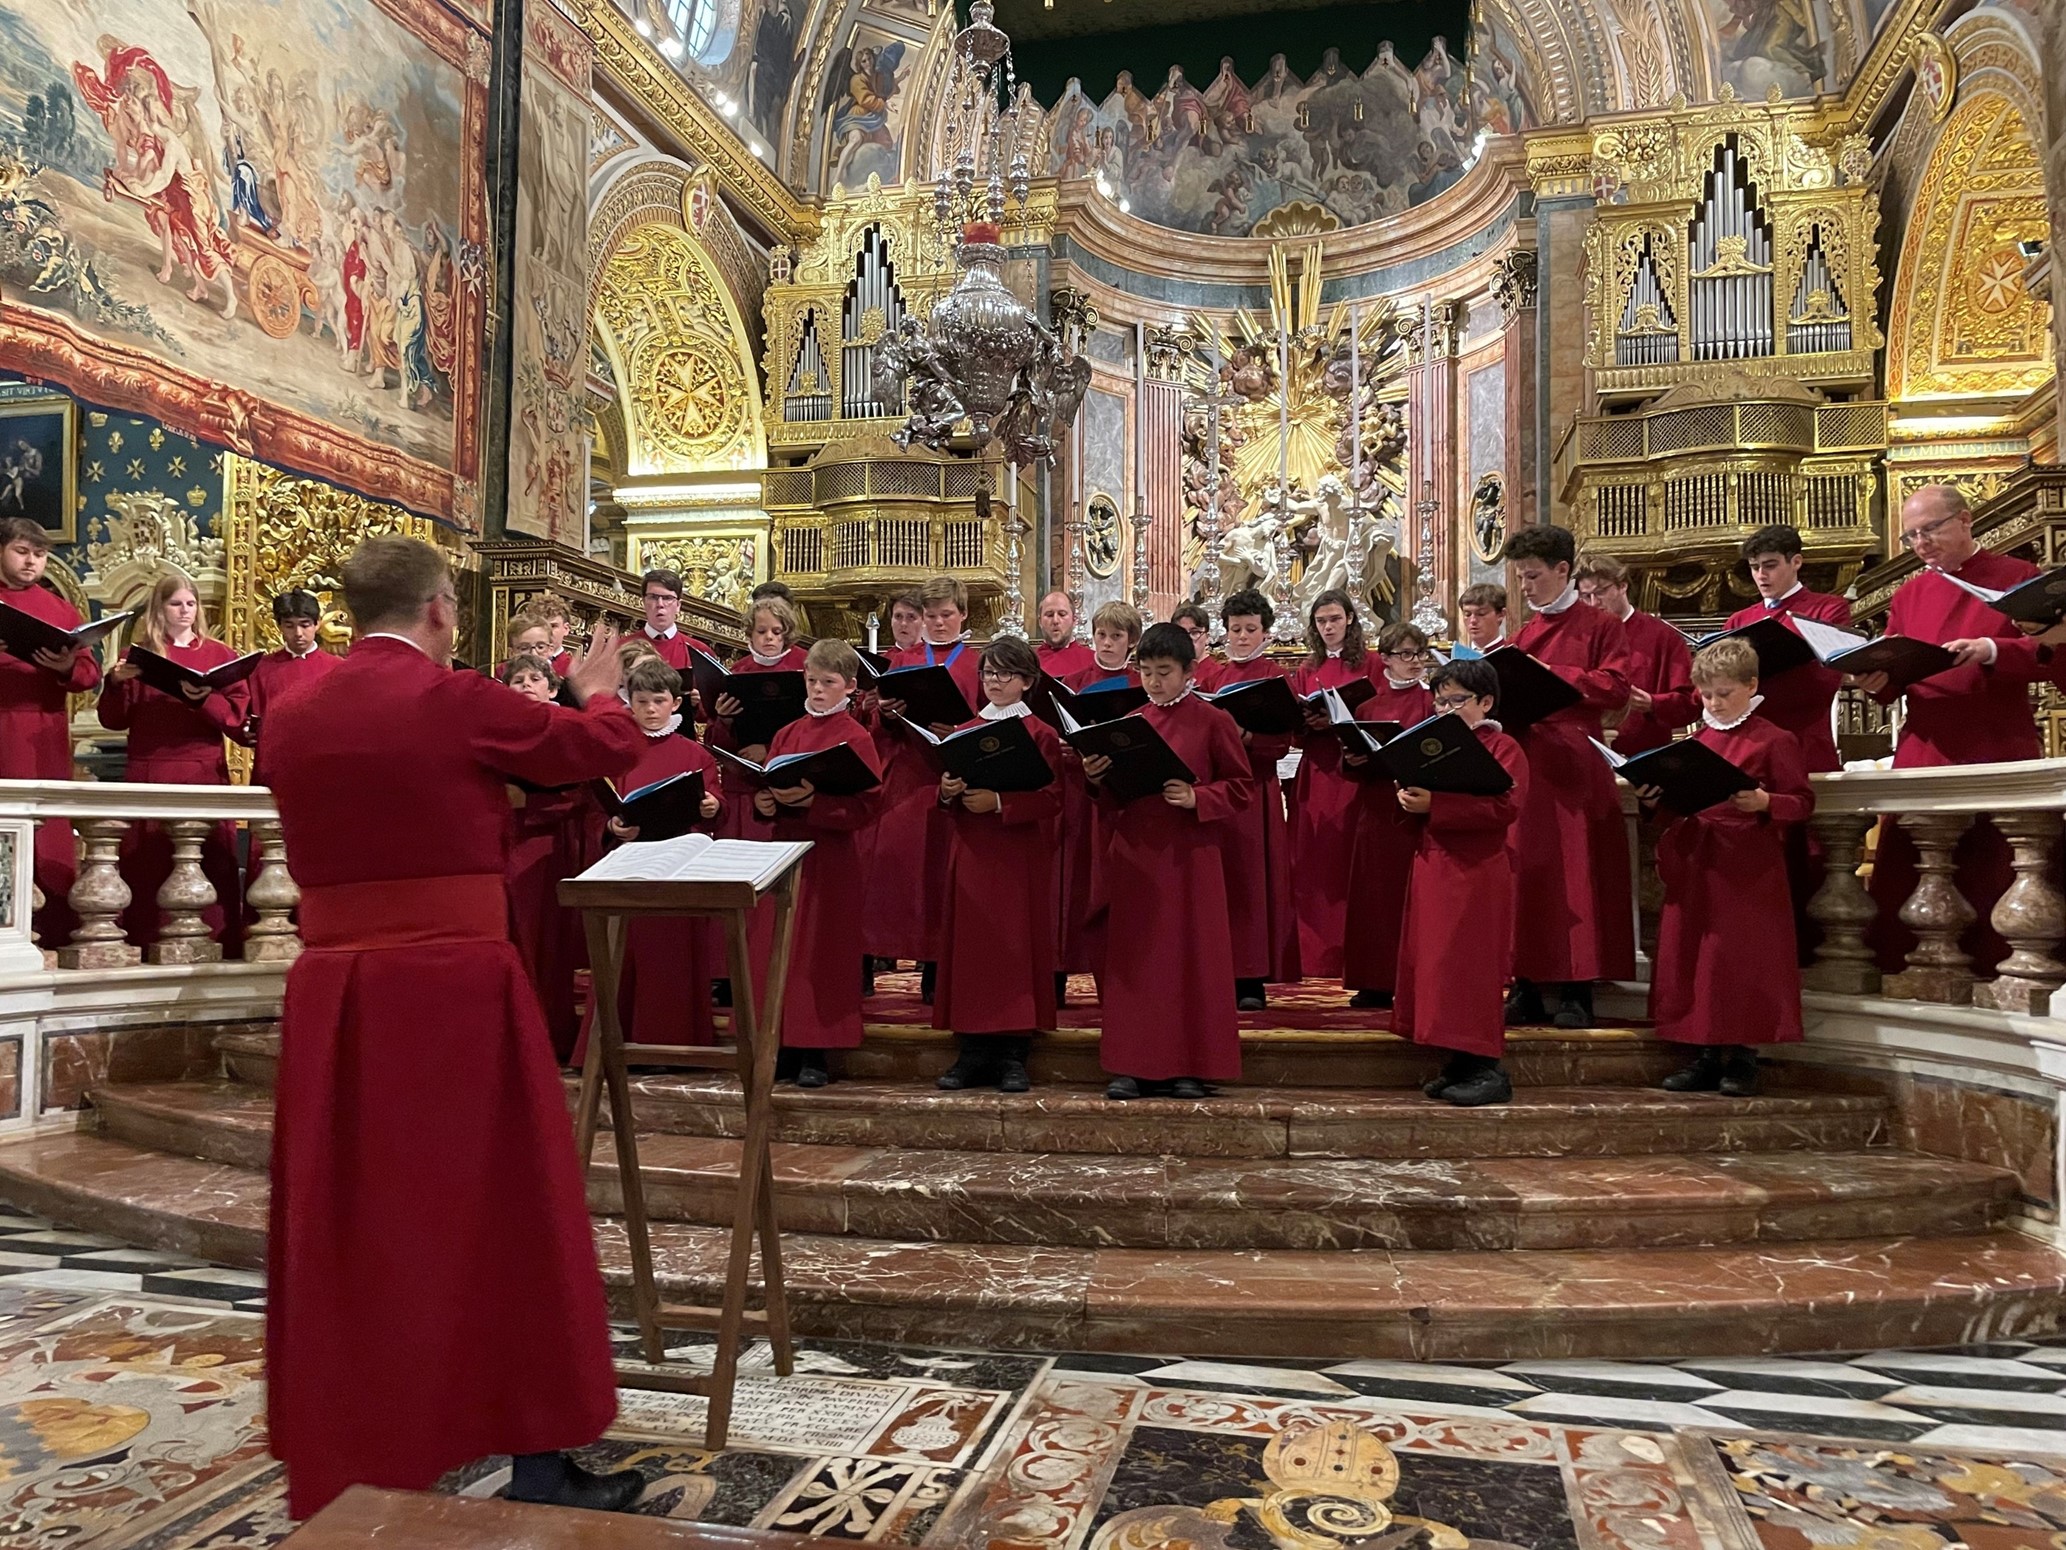 A choir wearing red robes, performing in an elaborately decorated church